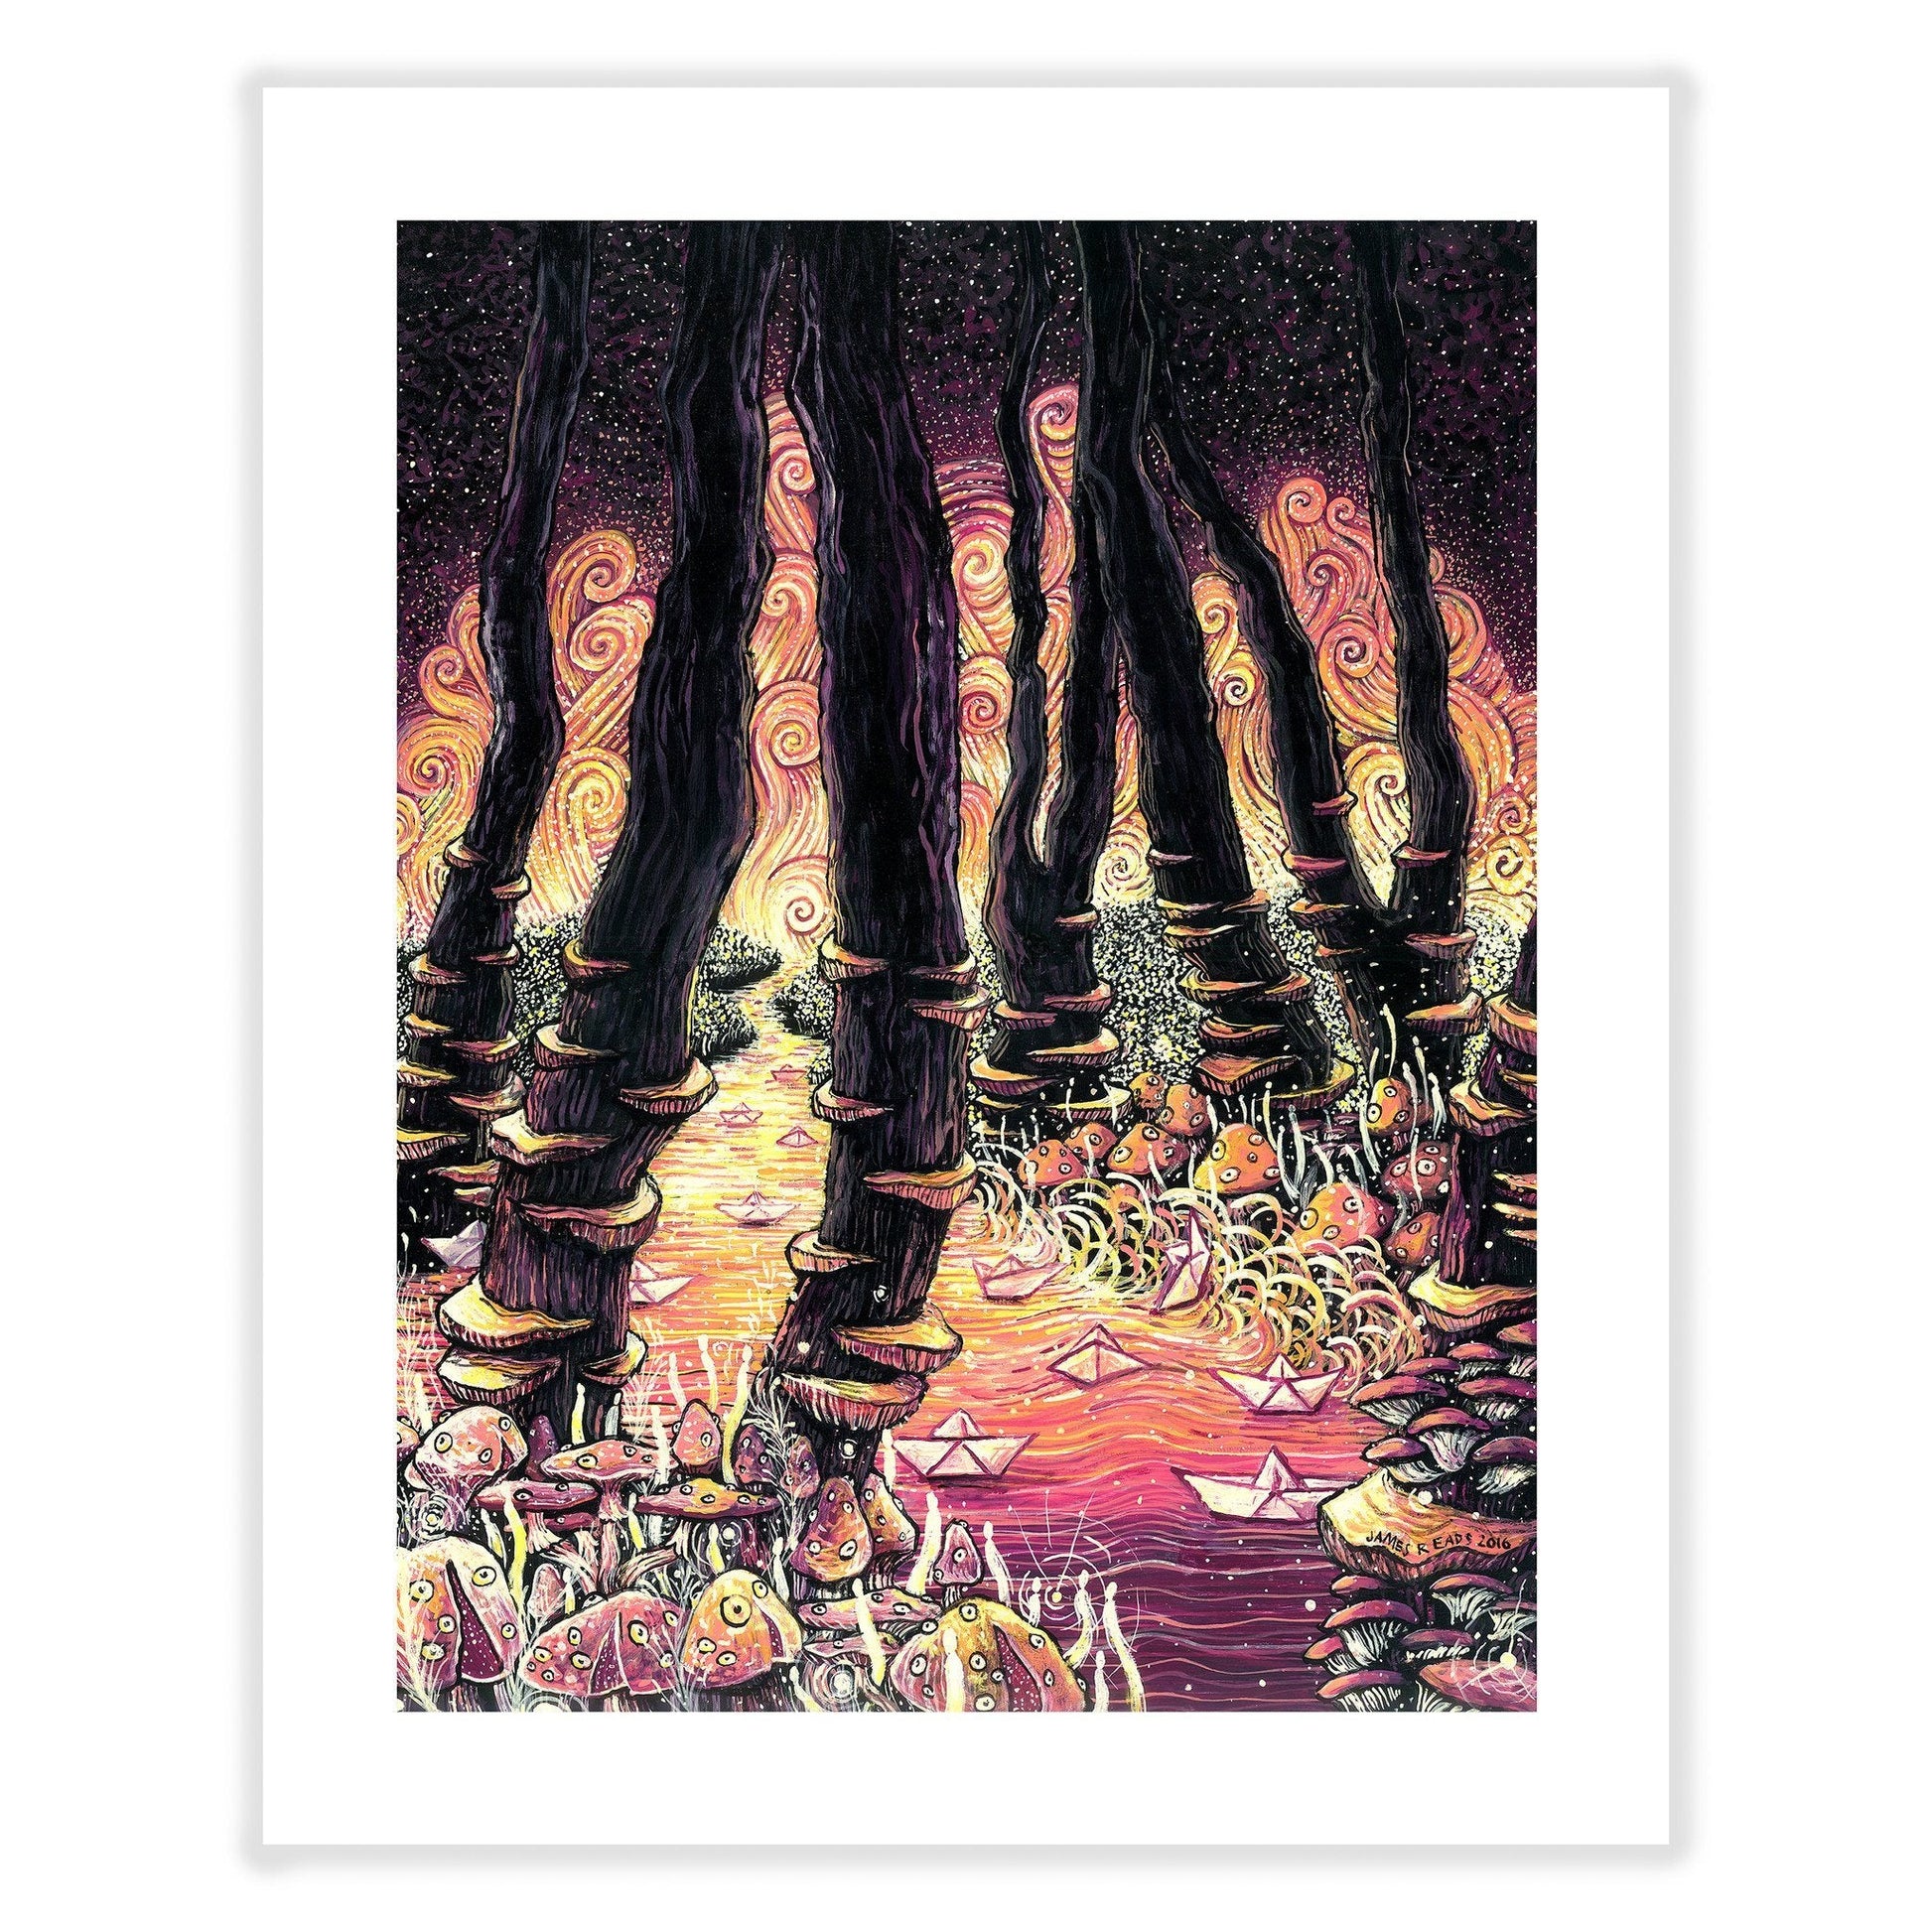 Mushroom Party (Limited Edition of 50) Print James R. Eads